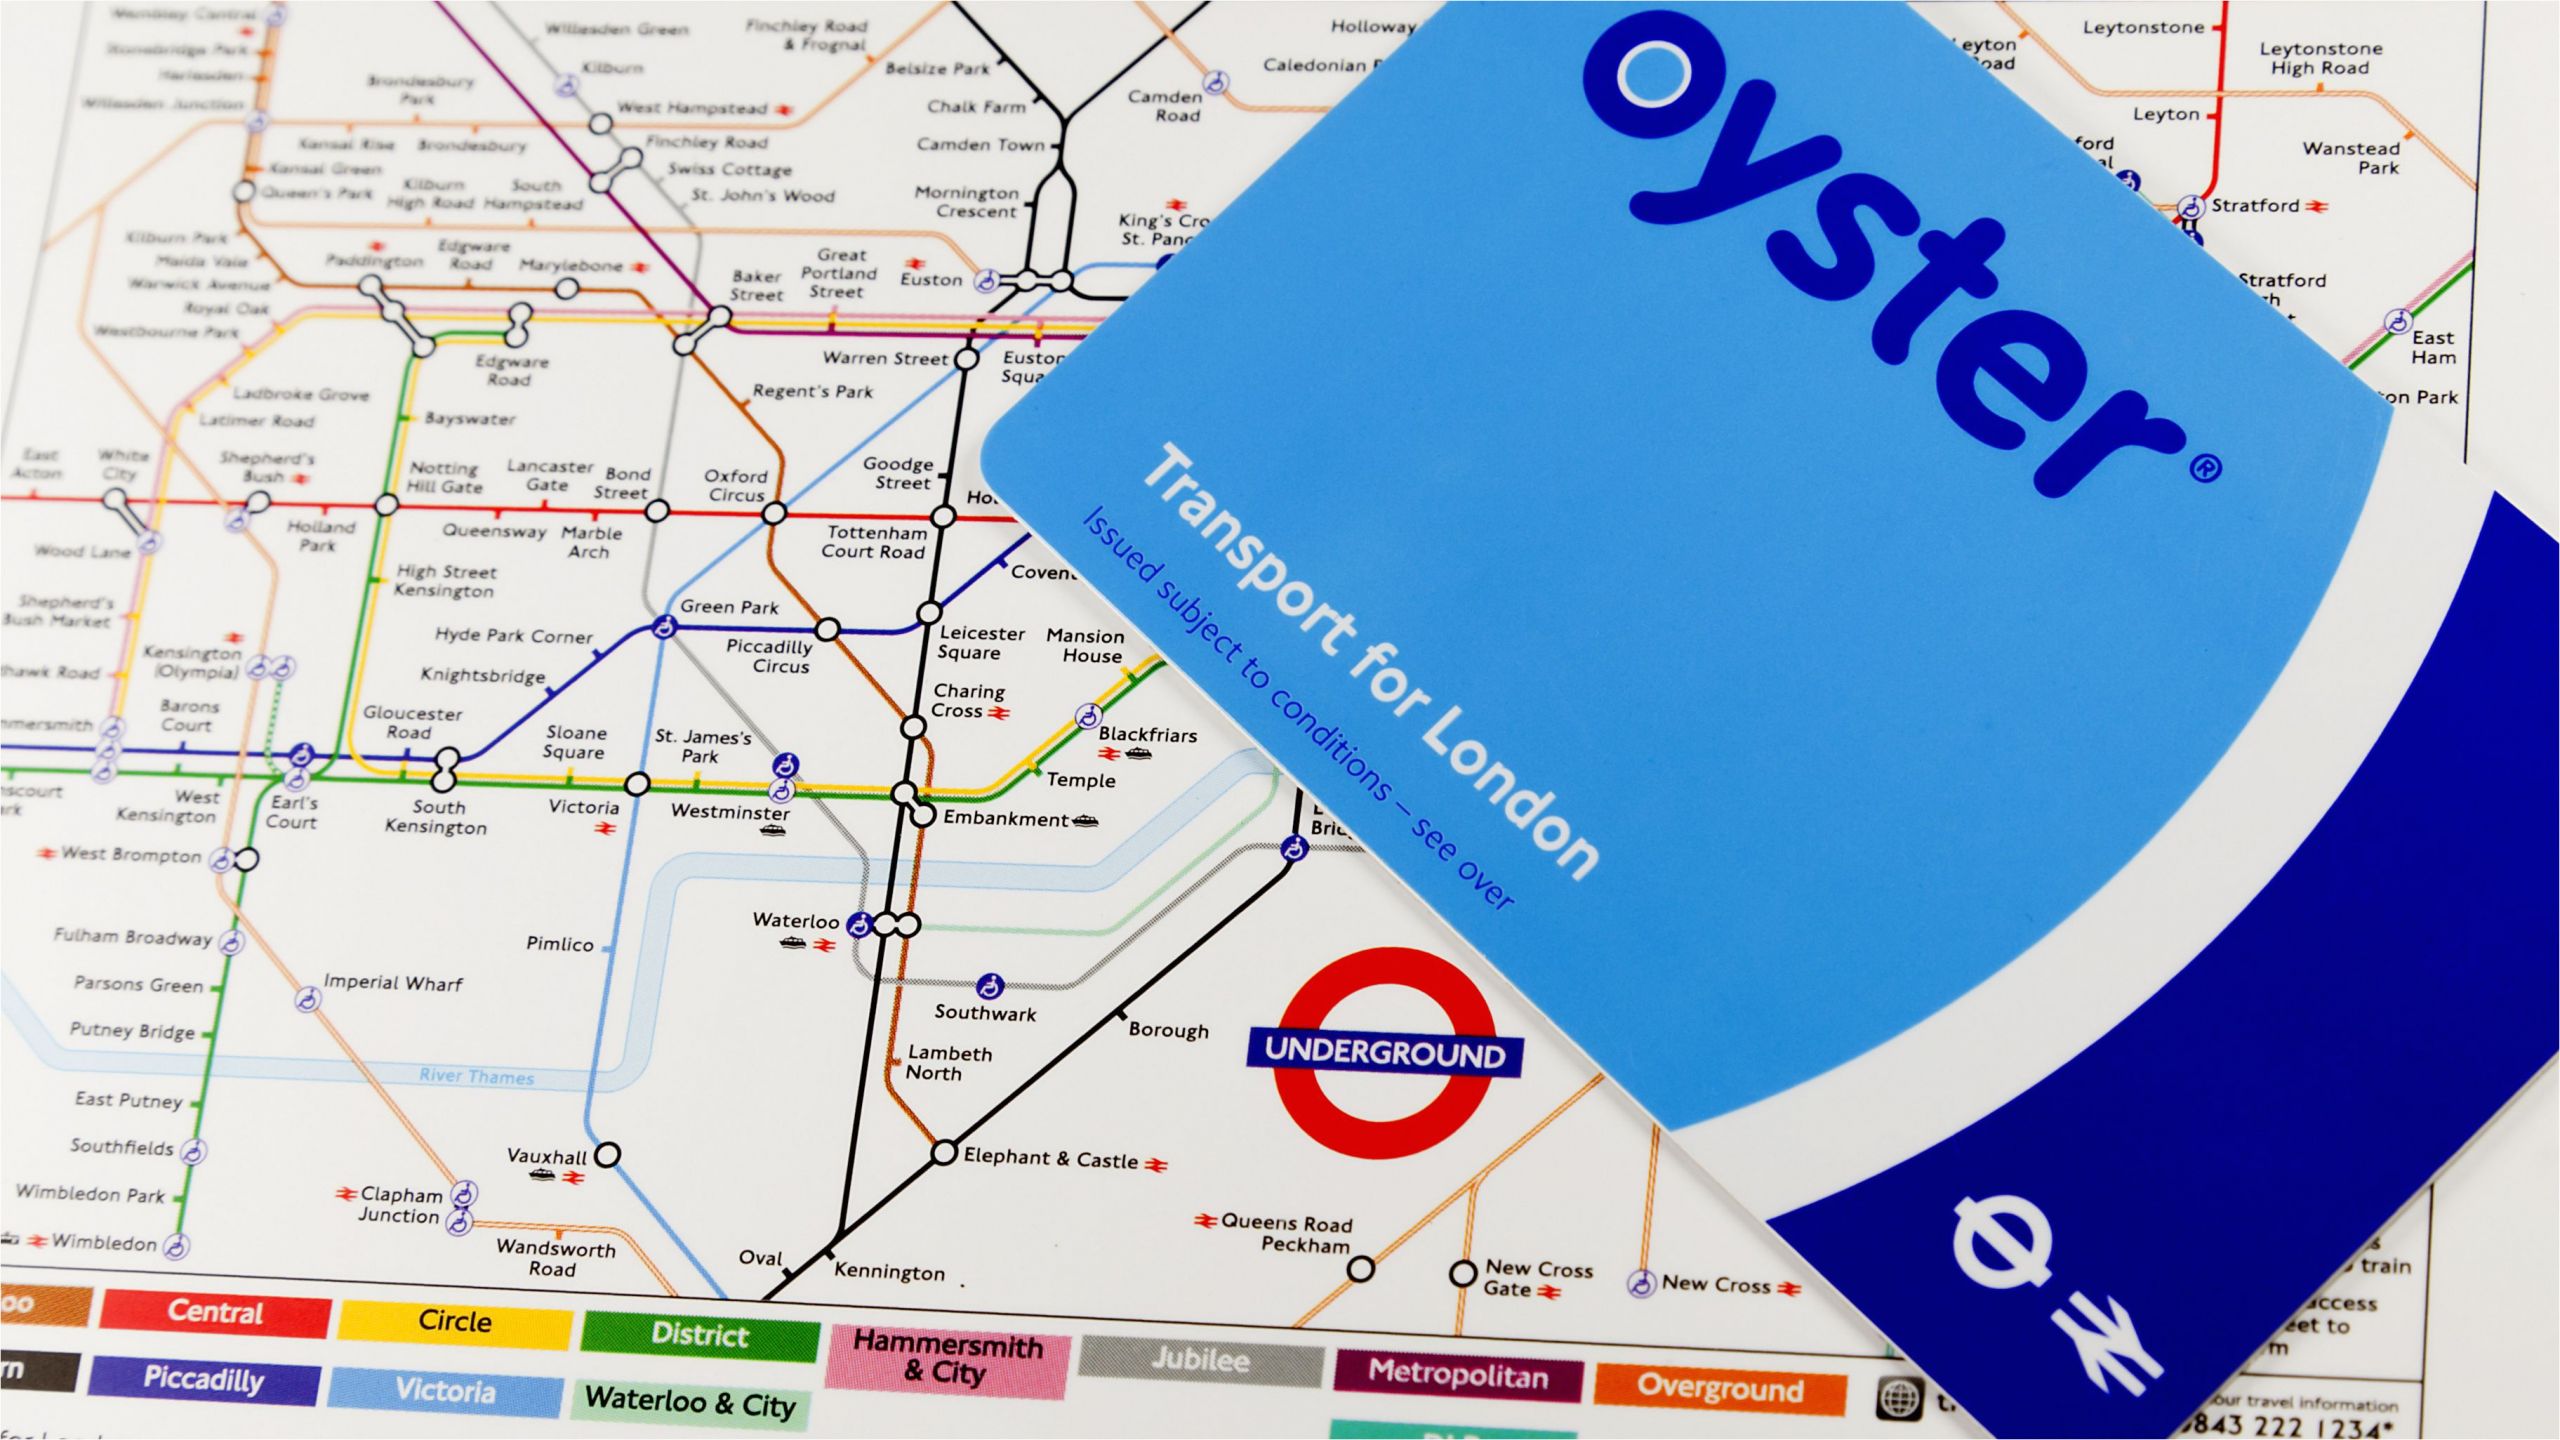 Paper Day Travel Card London London Travel which Oyster Card is Best for Visitors